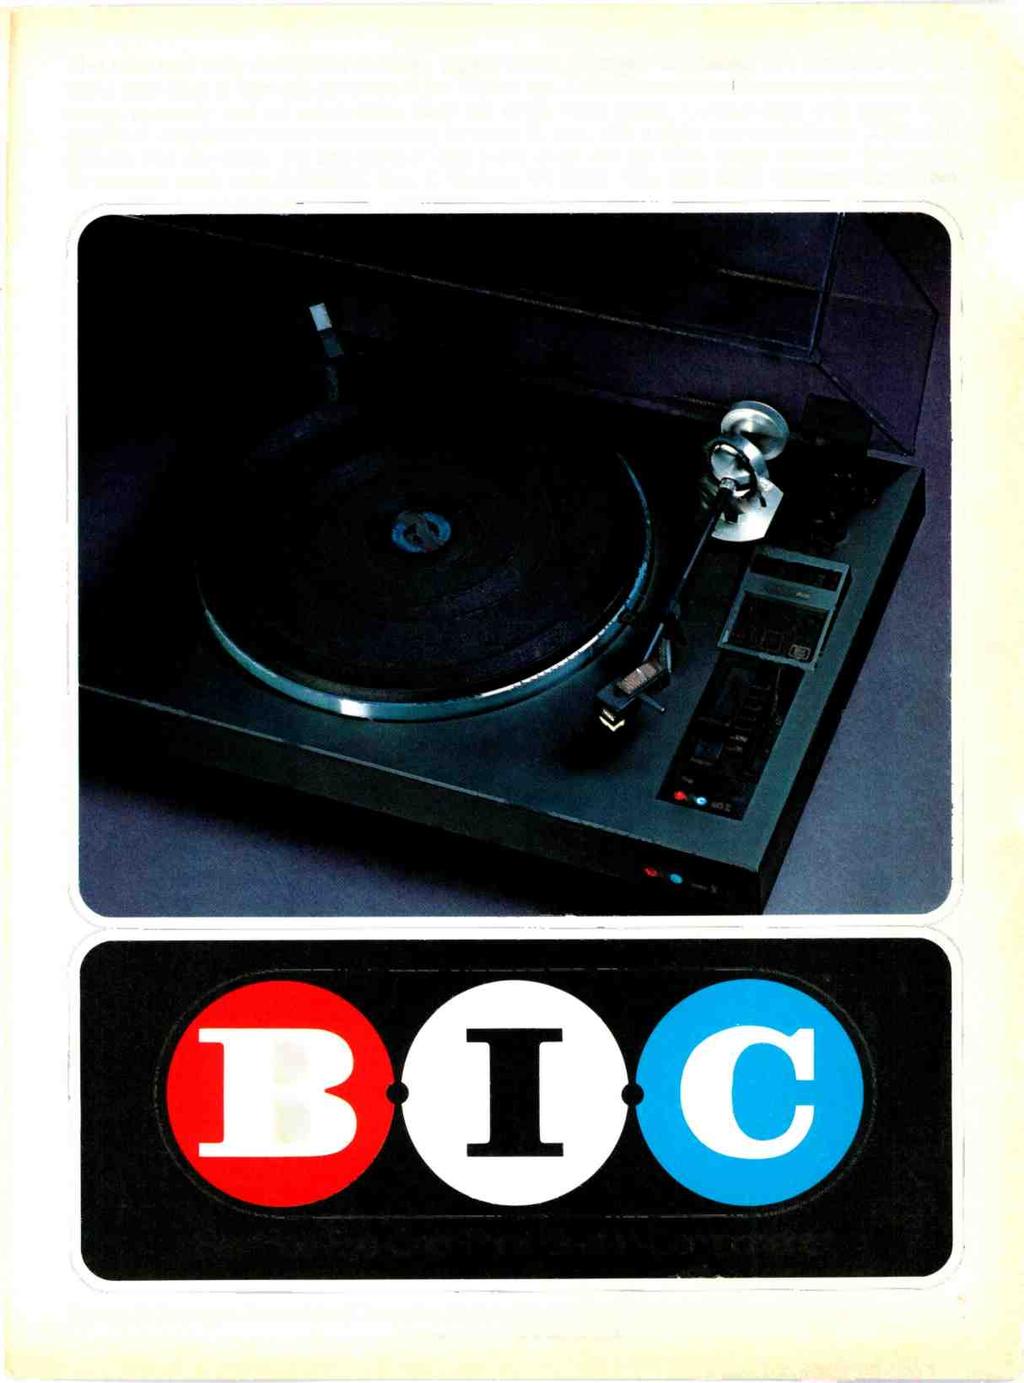 The one and only computer -locked, digital drive changer -turntable. B l C introduces the 80Z.